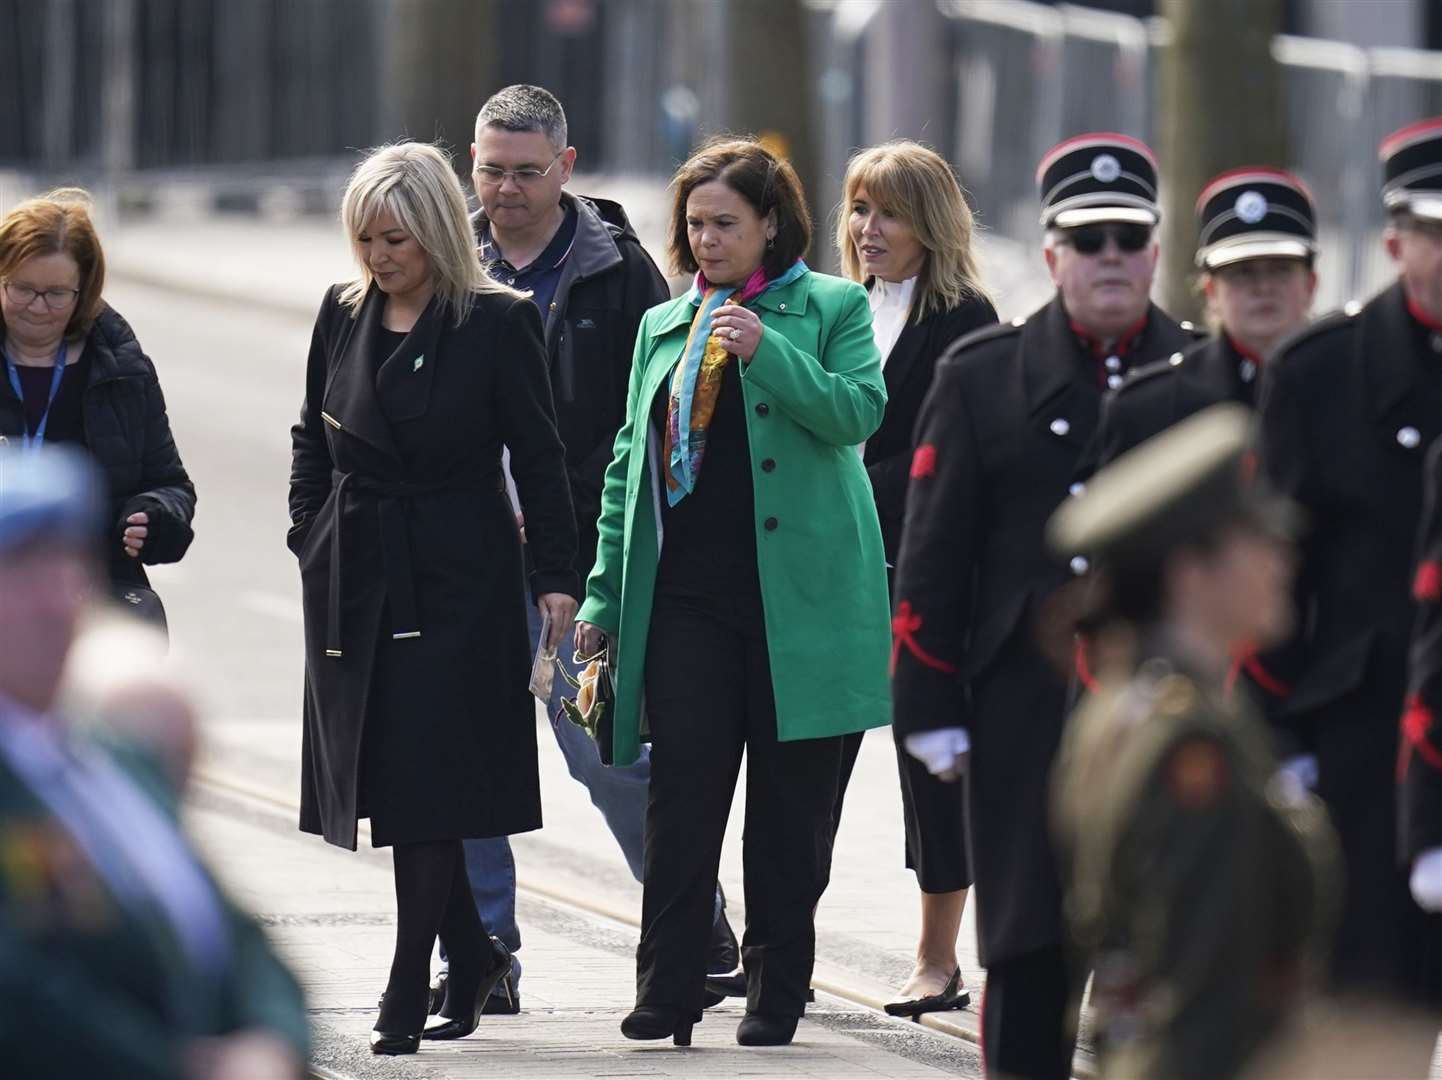 First Minister Michelle O’Neill and Sinn Fein President Mary Lou McDonald during a ceremony at the GPO on O’Connell Street in Dublin (Niall Carson/PA)